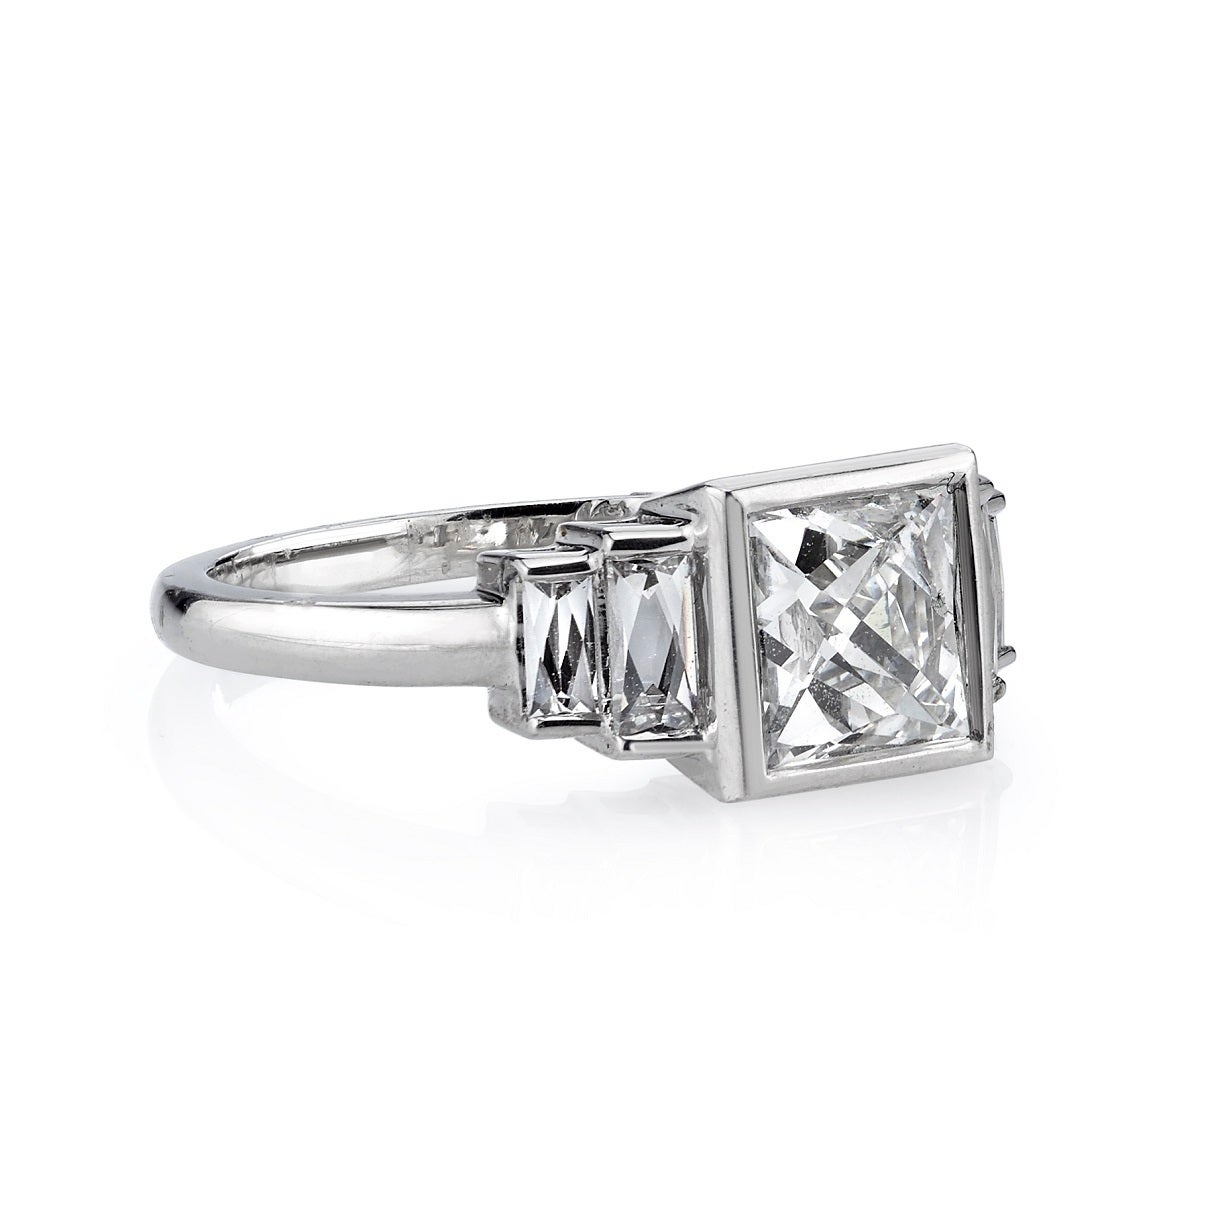 157 Carat French Cut Diamond Platinum Engagement Ring For Sale At 1stdibs